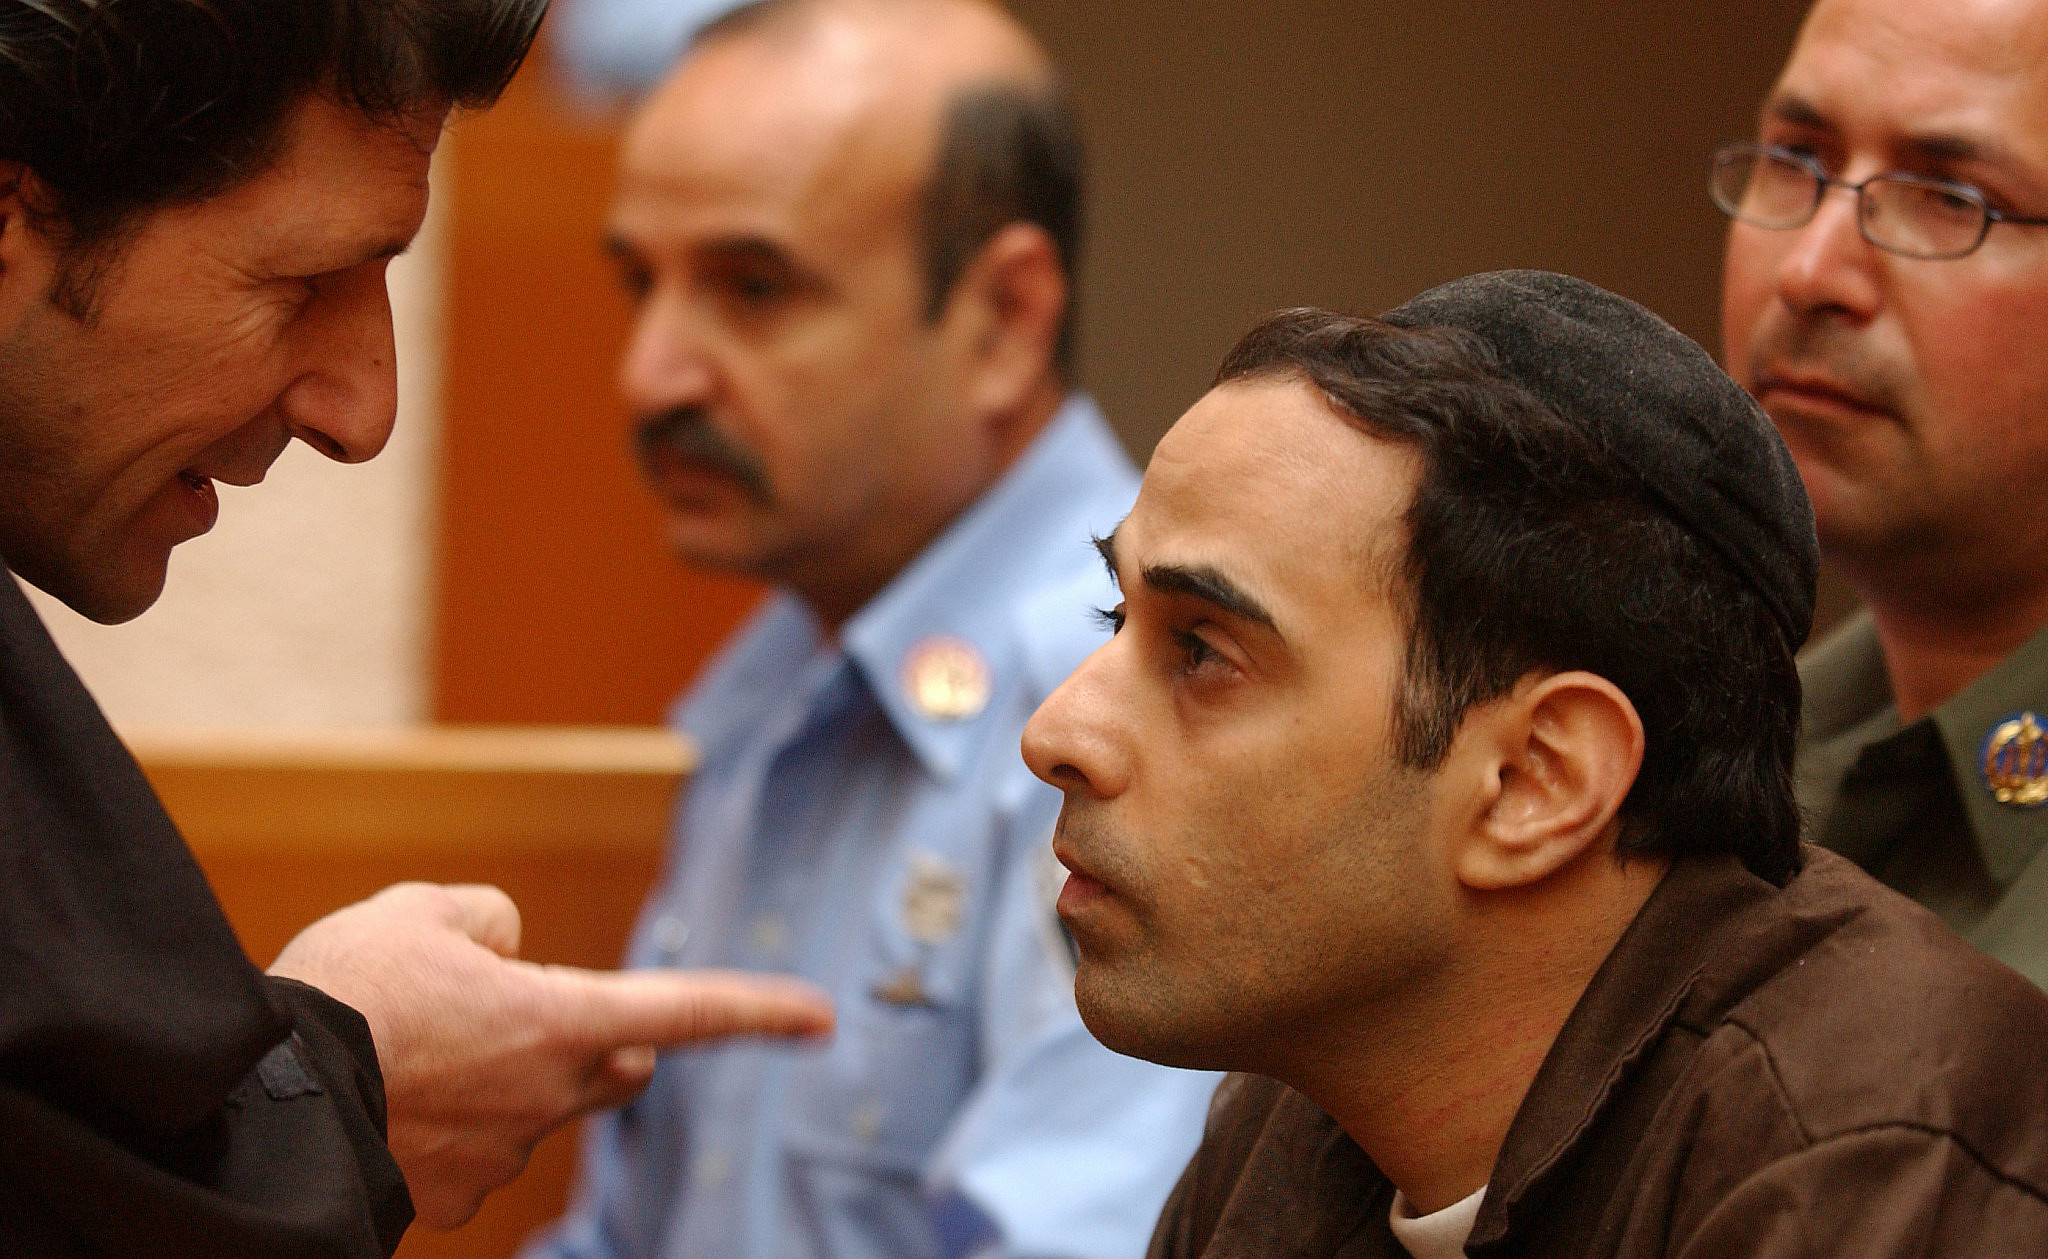 Yigal Amir, who was charged with the murder of Israeli Prime Minister Yitzhak Rabin, speaks with his lawyer Shmuel Casper at the Supreme Court in Jerusalem on March 07, 2005. (Flash90)